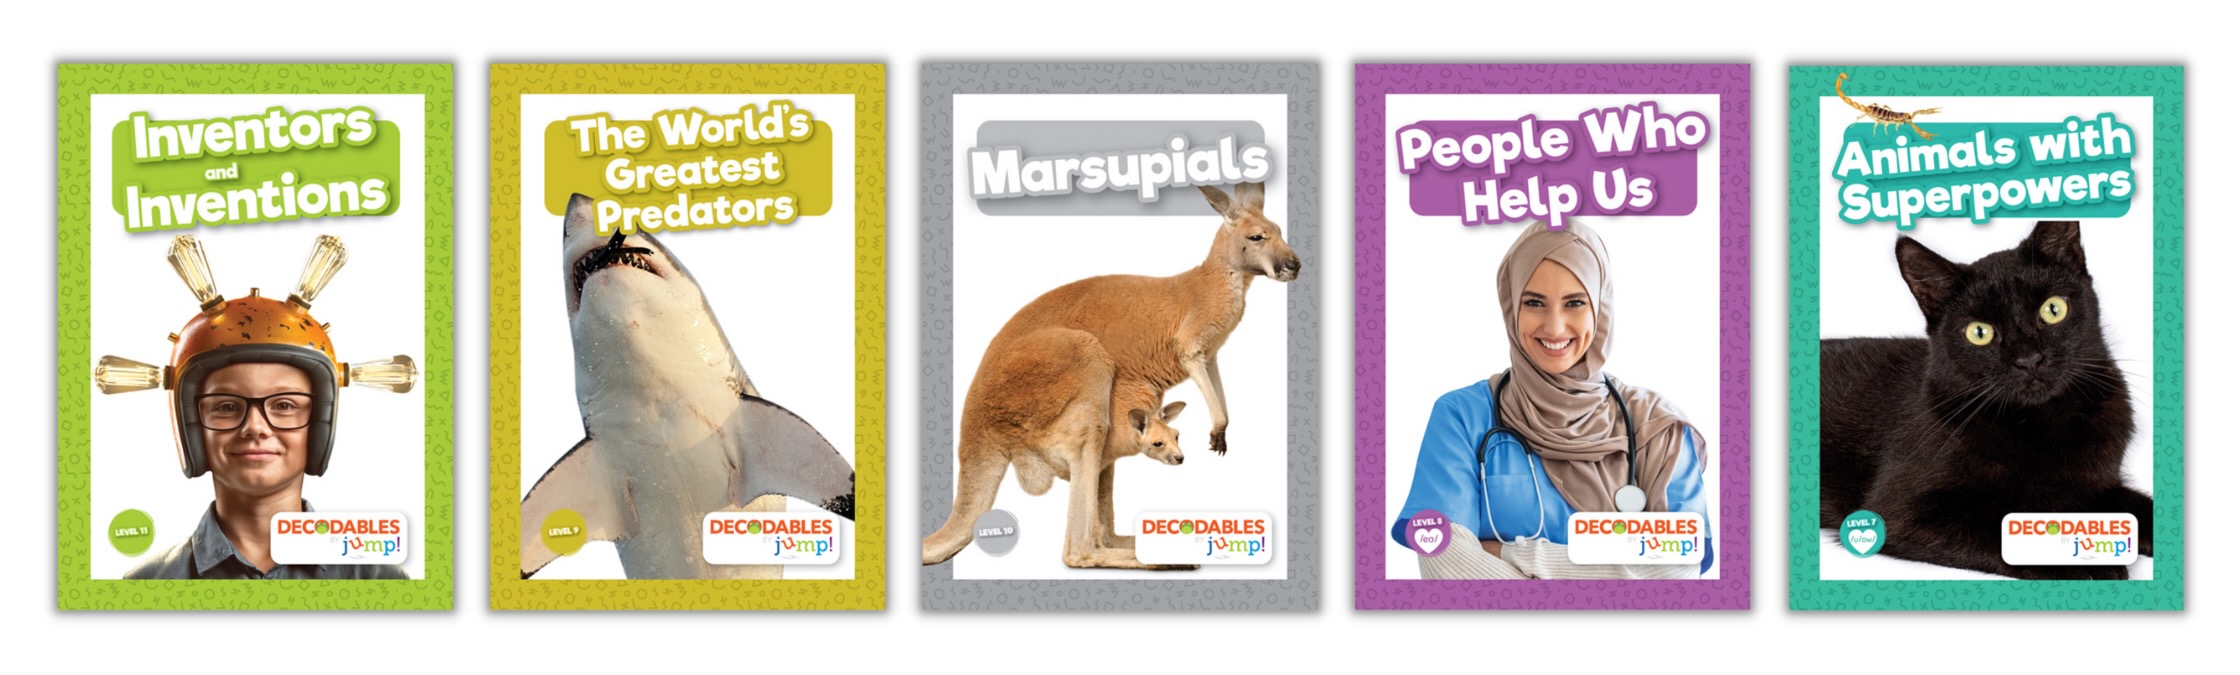 Featured Decodable Covers